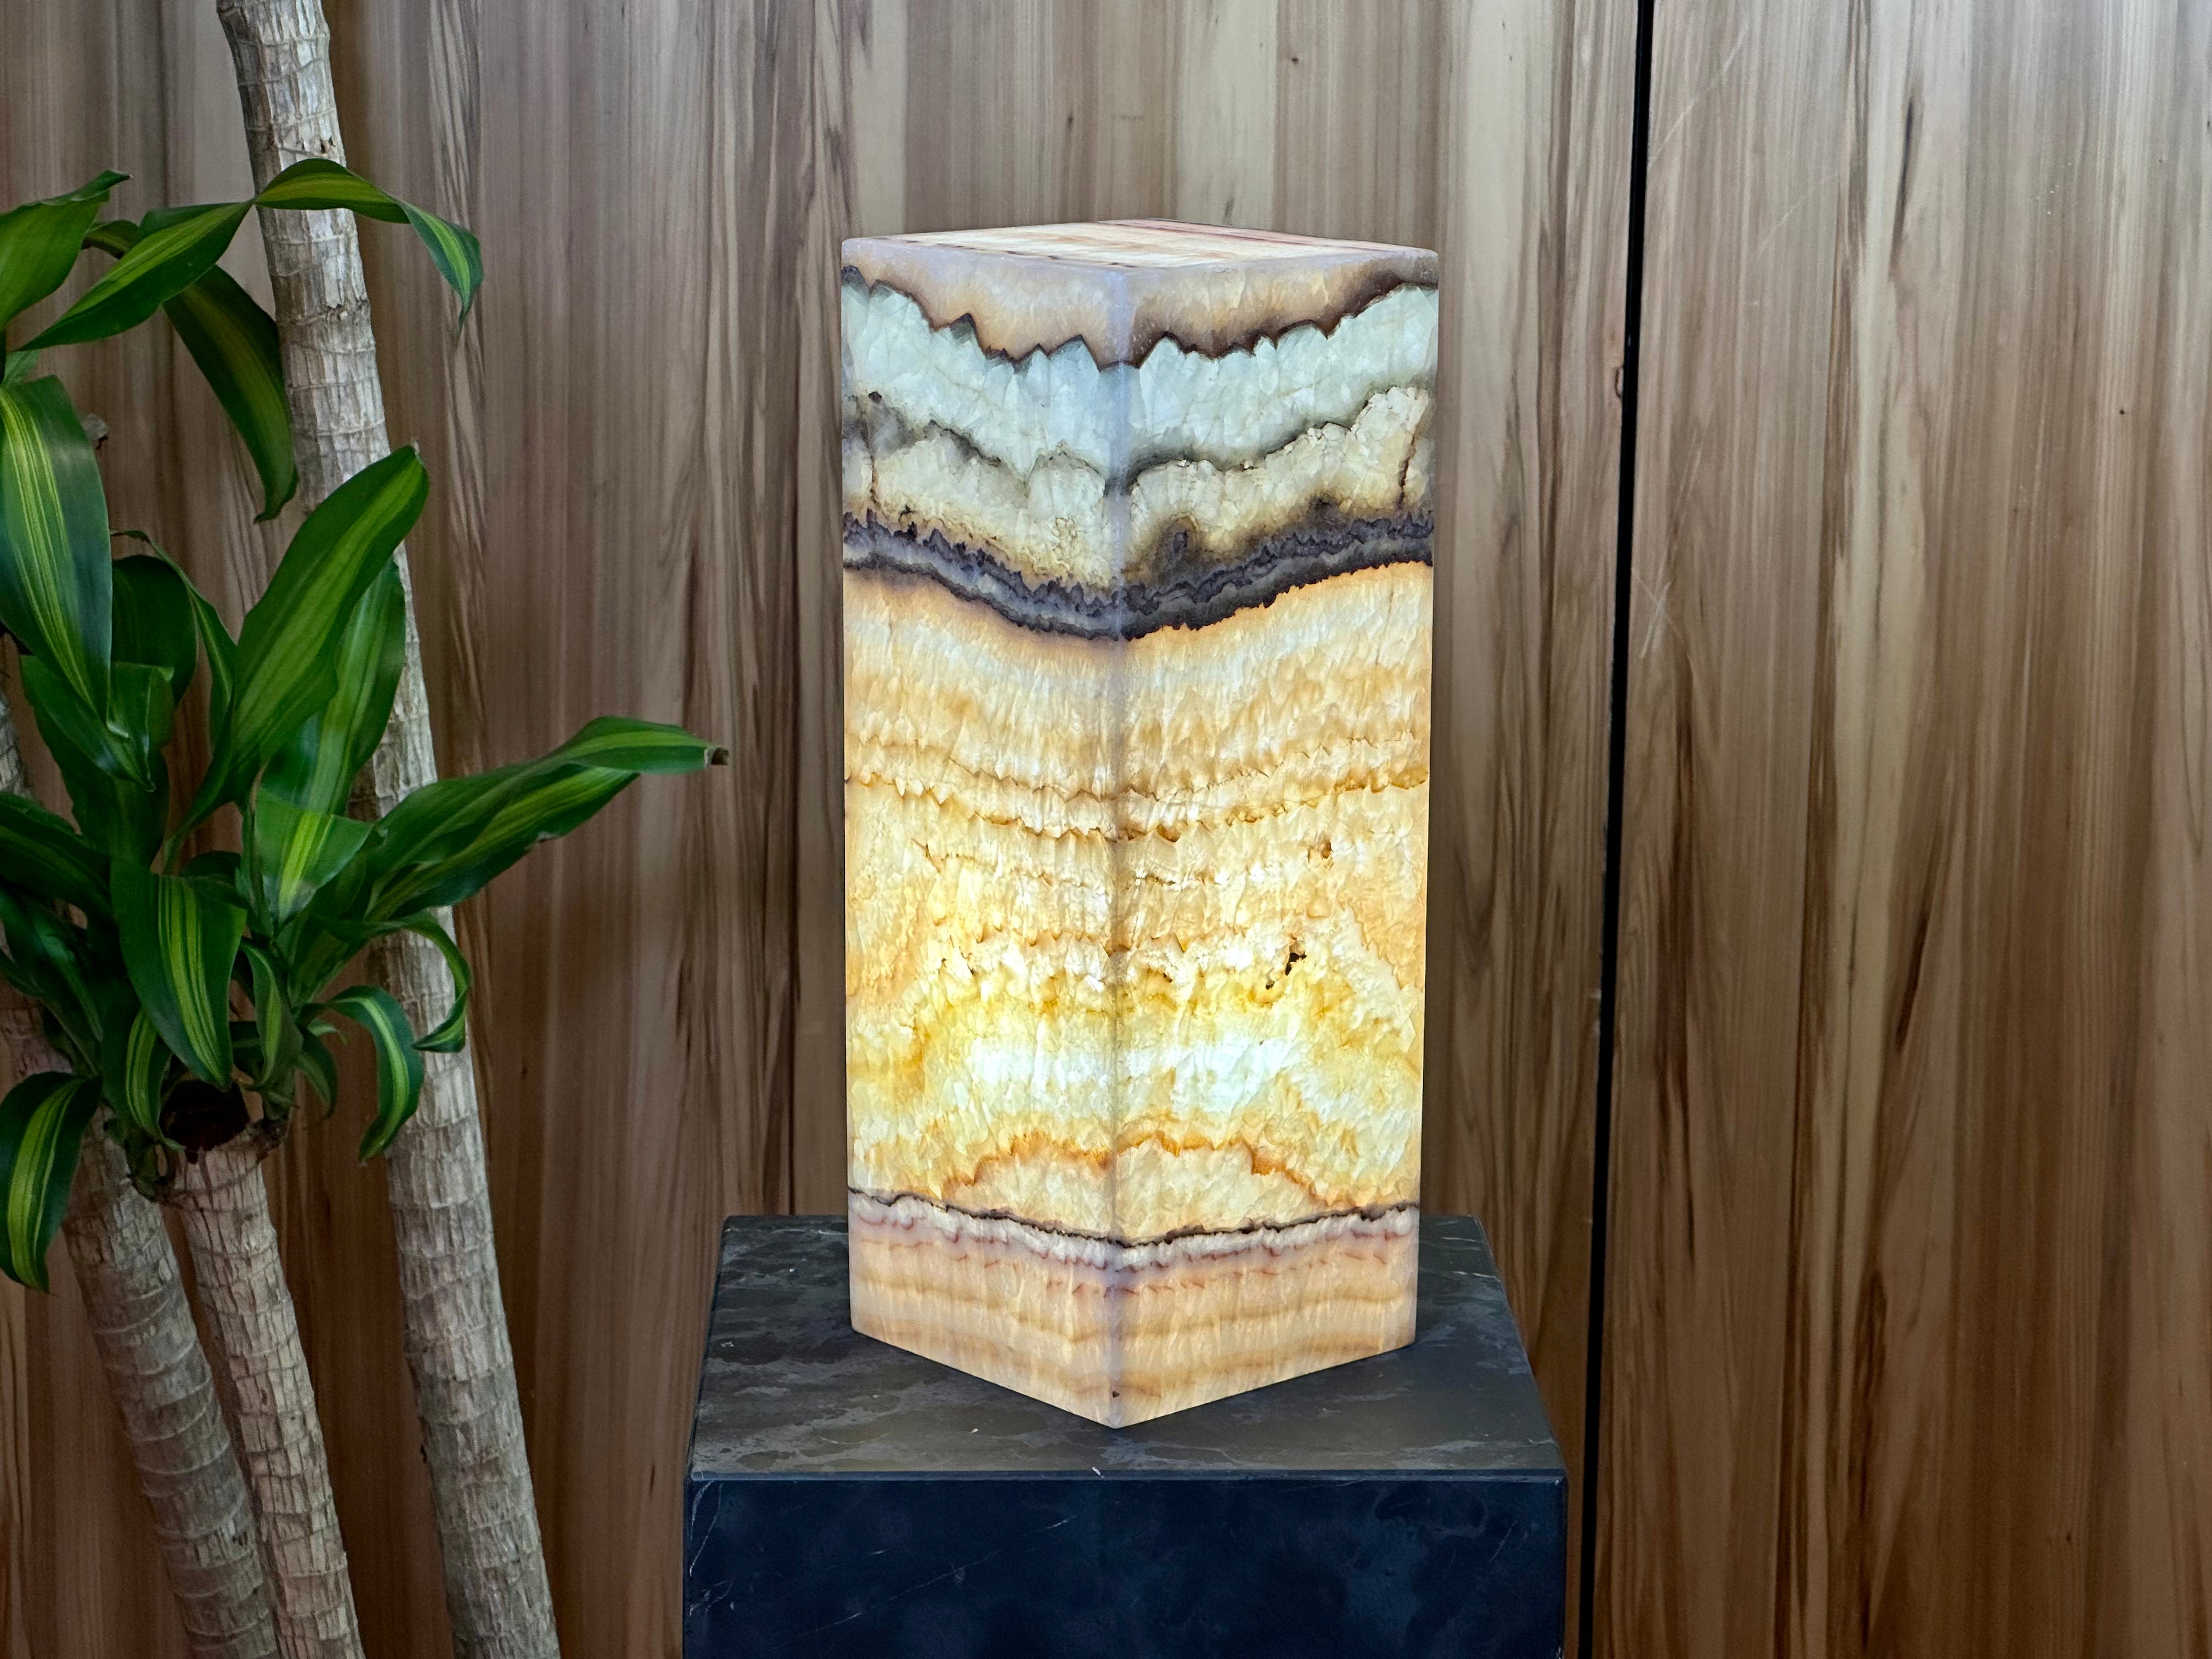 Blue Banded Onyx - Designer Stone Lamps for Home Decor - Elevate your interior decor with handcrafted onyx lamps perfect for bedroom, living room or office